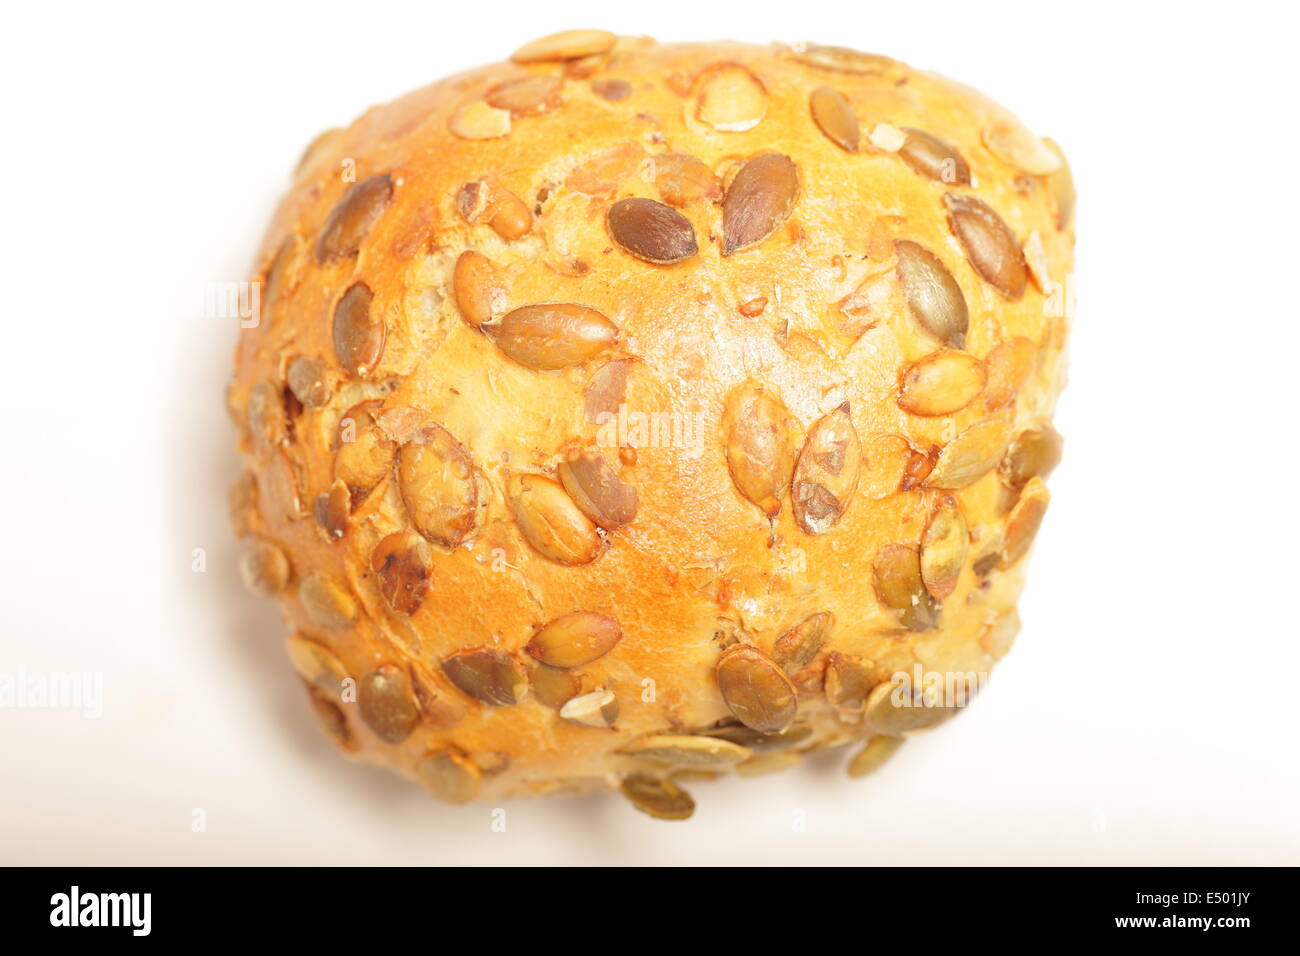 Crusty golden roll with sunflower seed Stock Photo